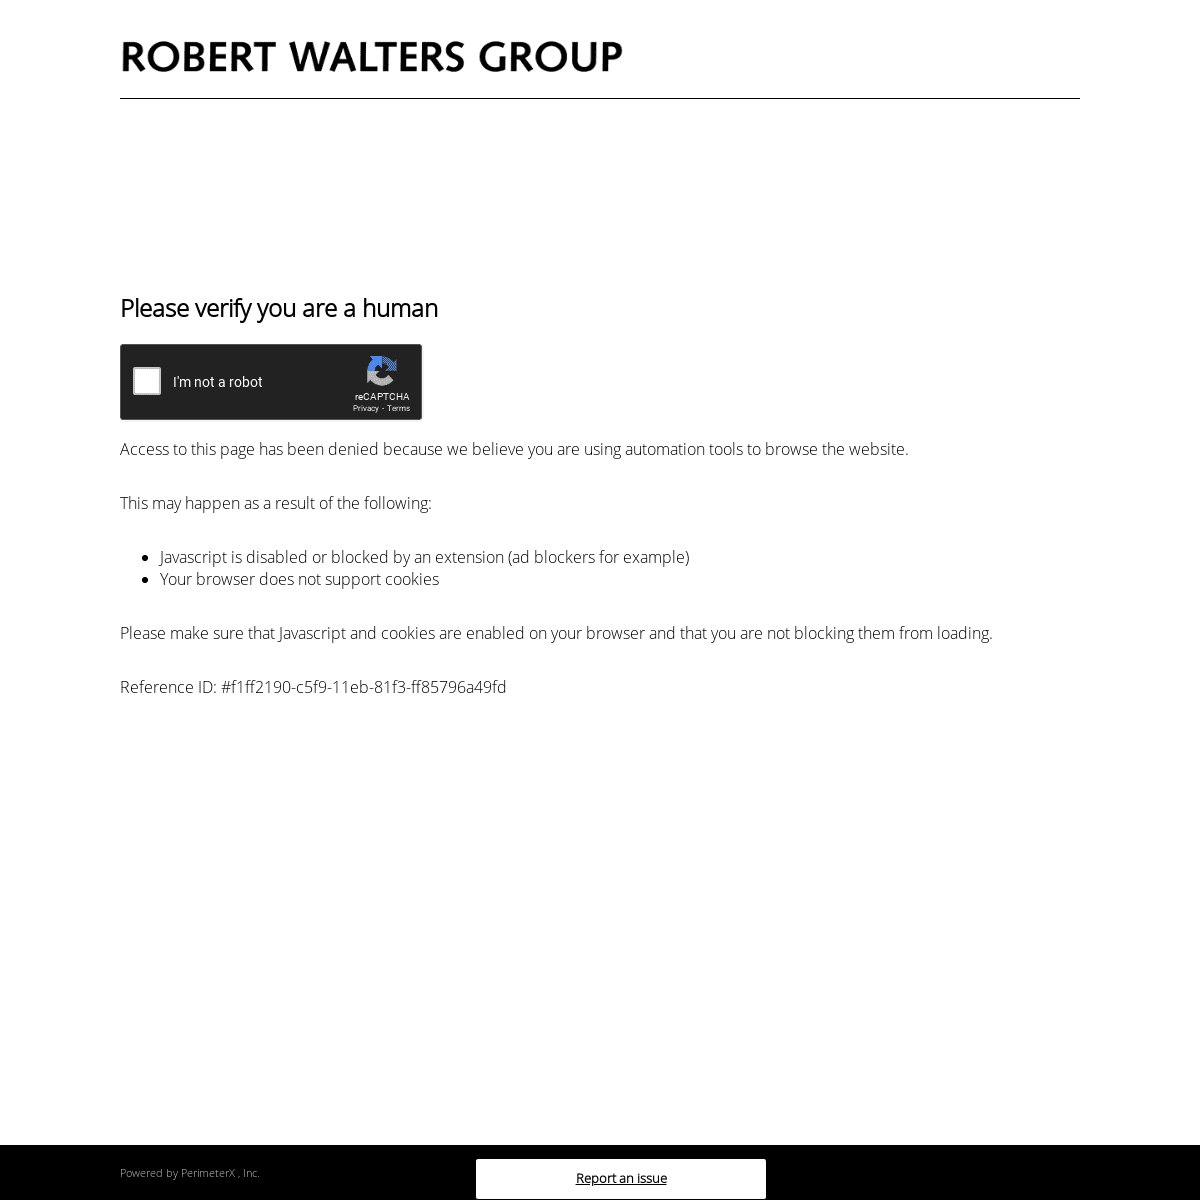 A complete backup of https://robertwalters.com